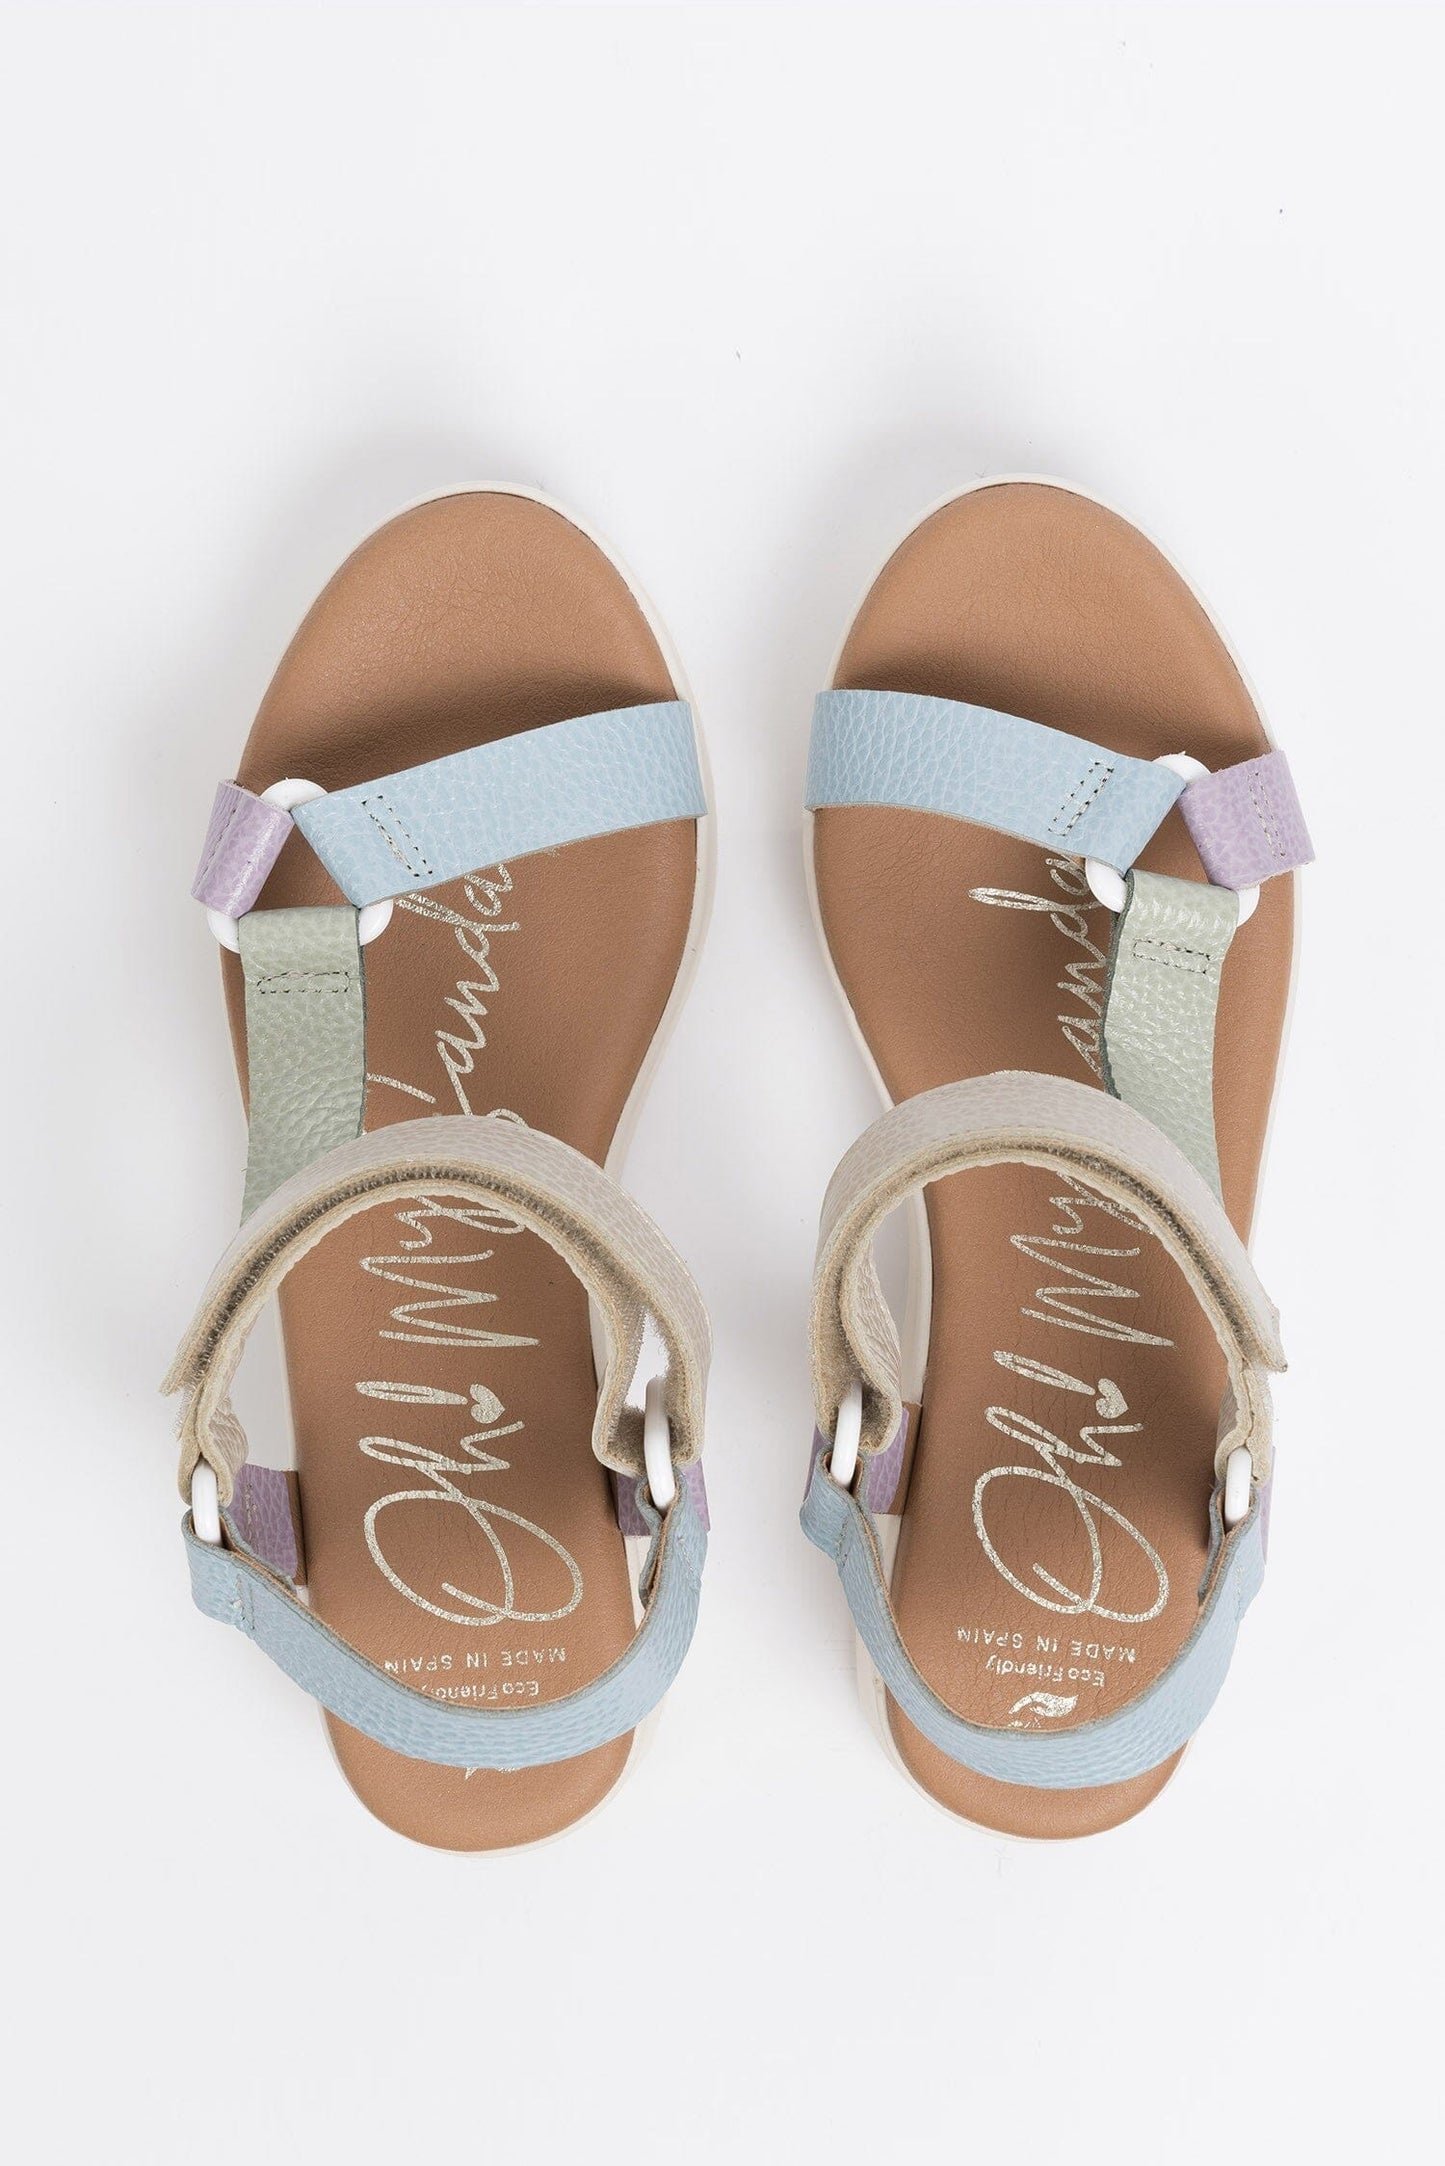 5186 Spanish leather Sport delux sandals/wedge with velcro in Pastel colour sandals Sam Star Shoes Pastel colour 40/7 